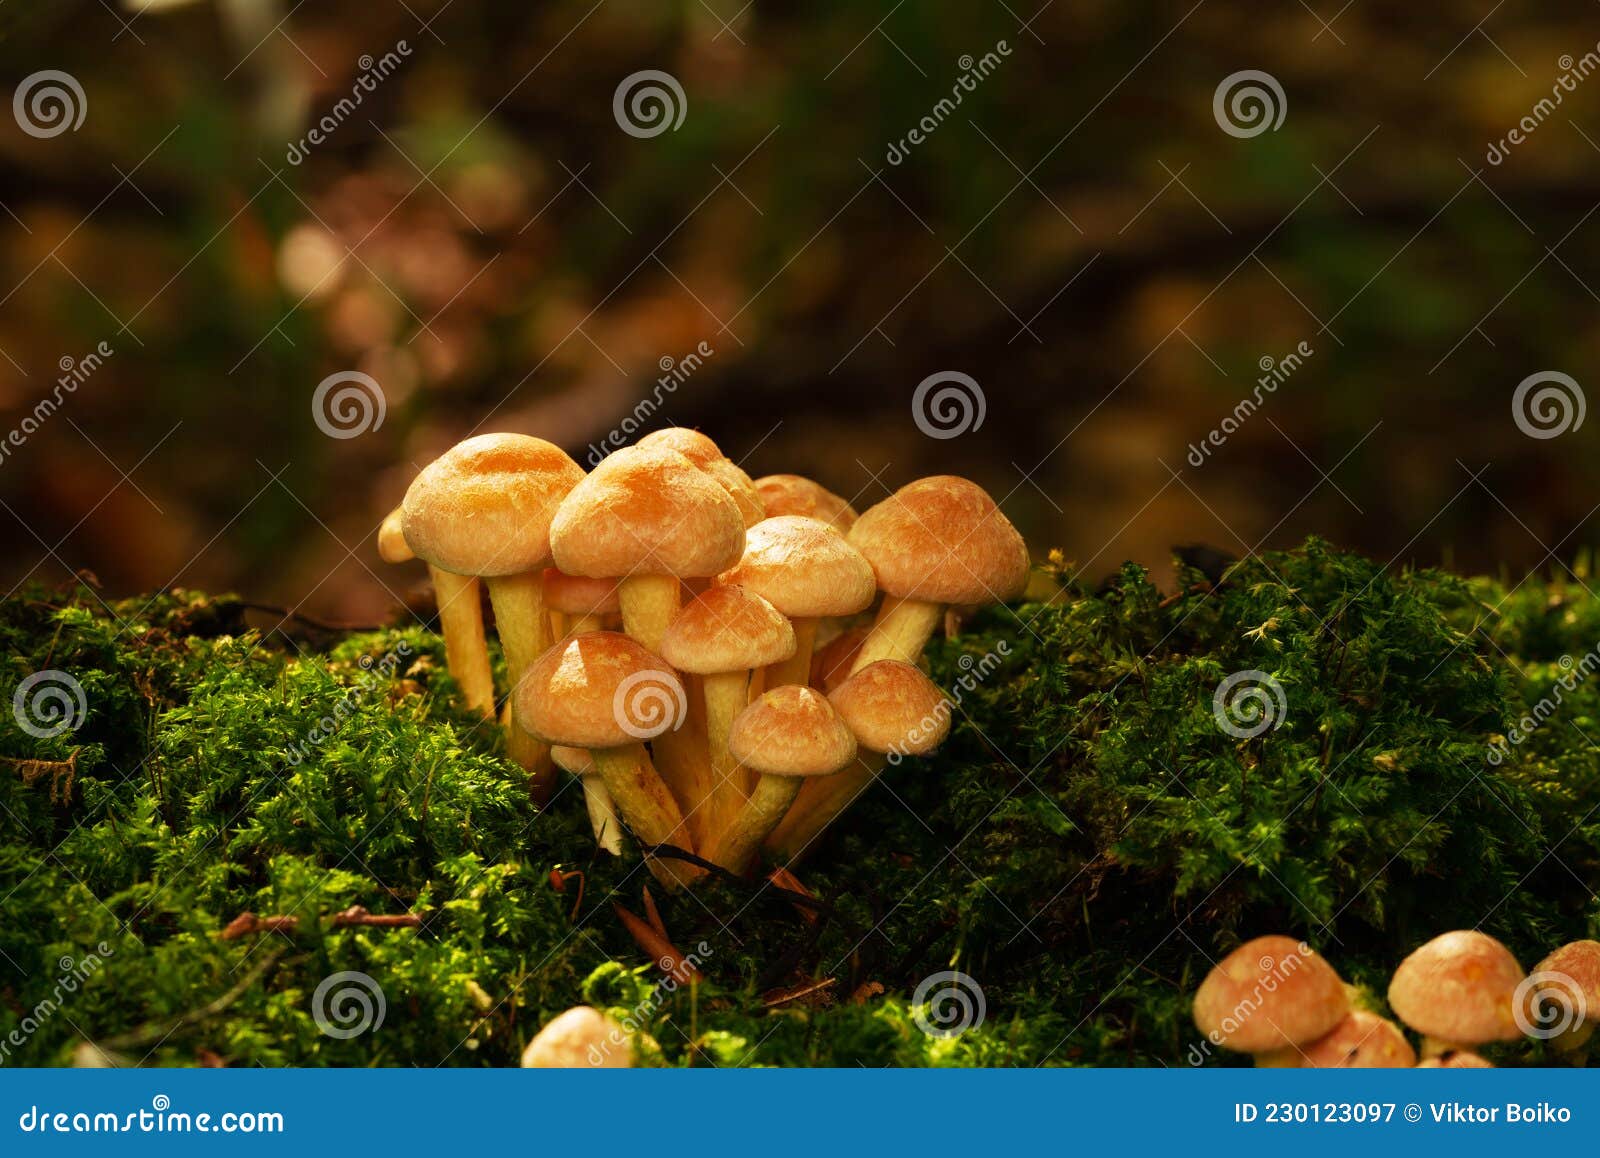 Natural Macro Landscape with Beautiful Mushrooms in Moss Stock Image - Image of background, fungi: